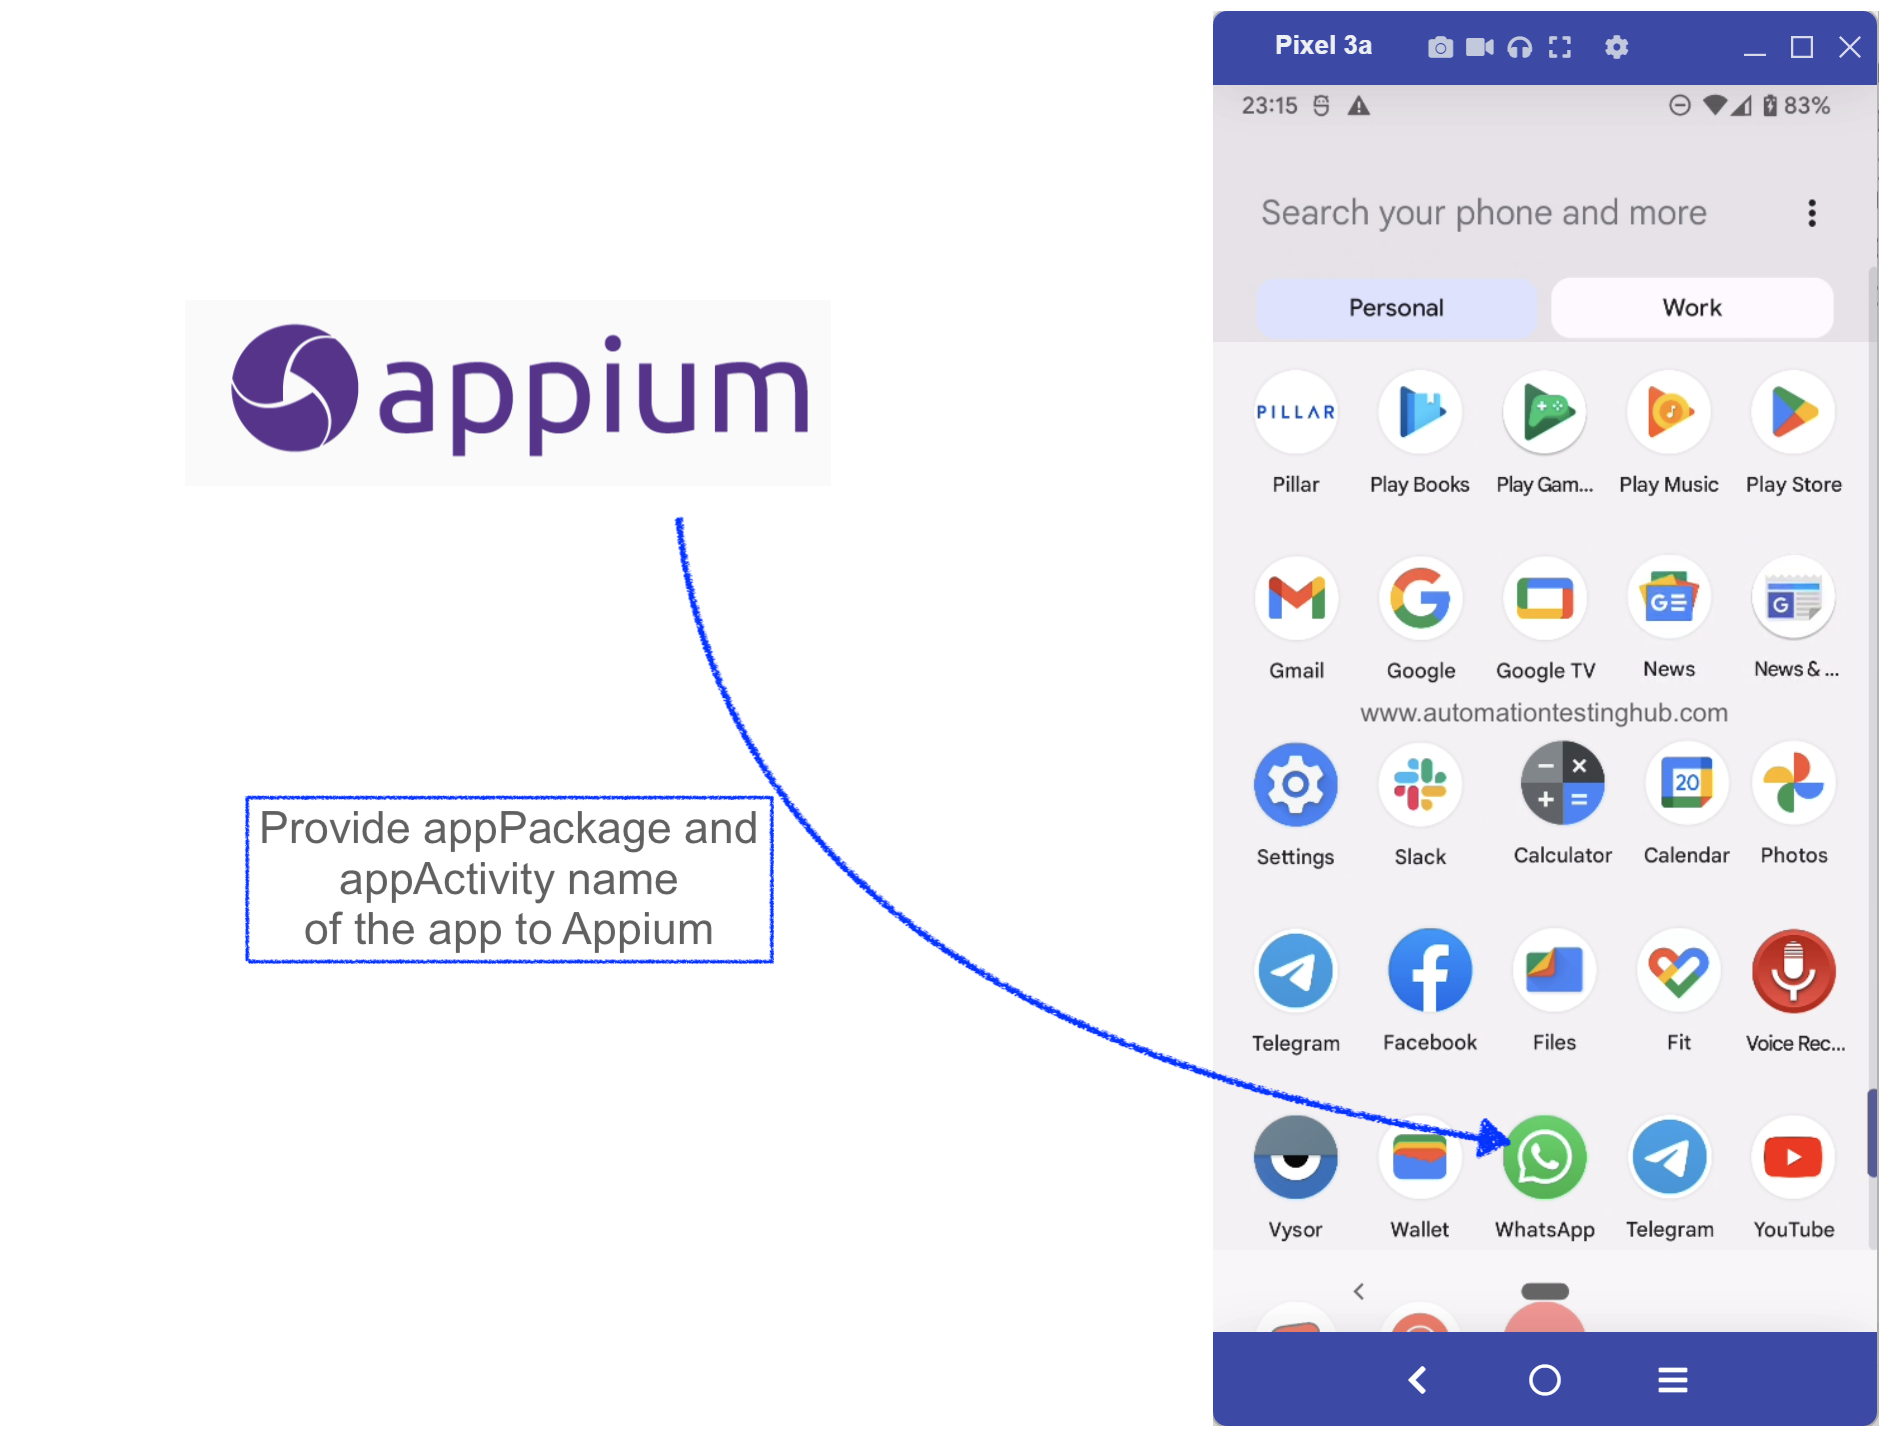 Provide appPackage and appActivity name to Appium